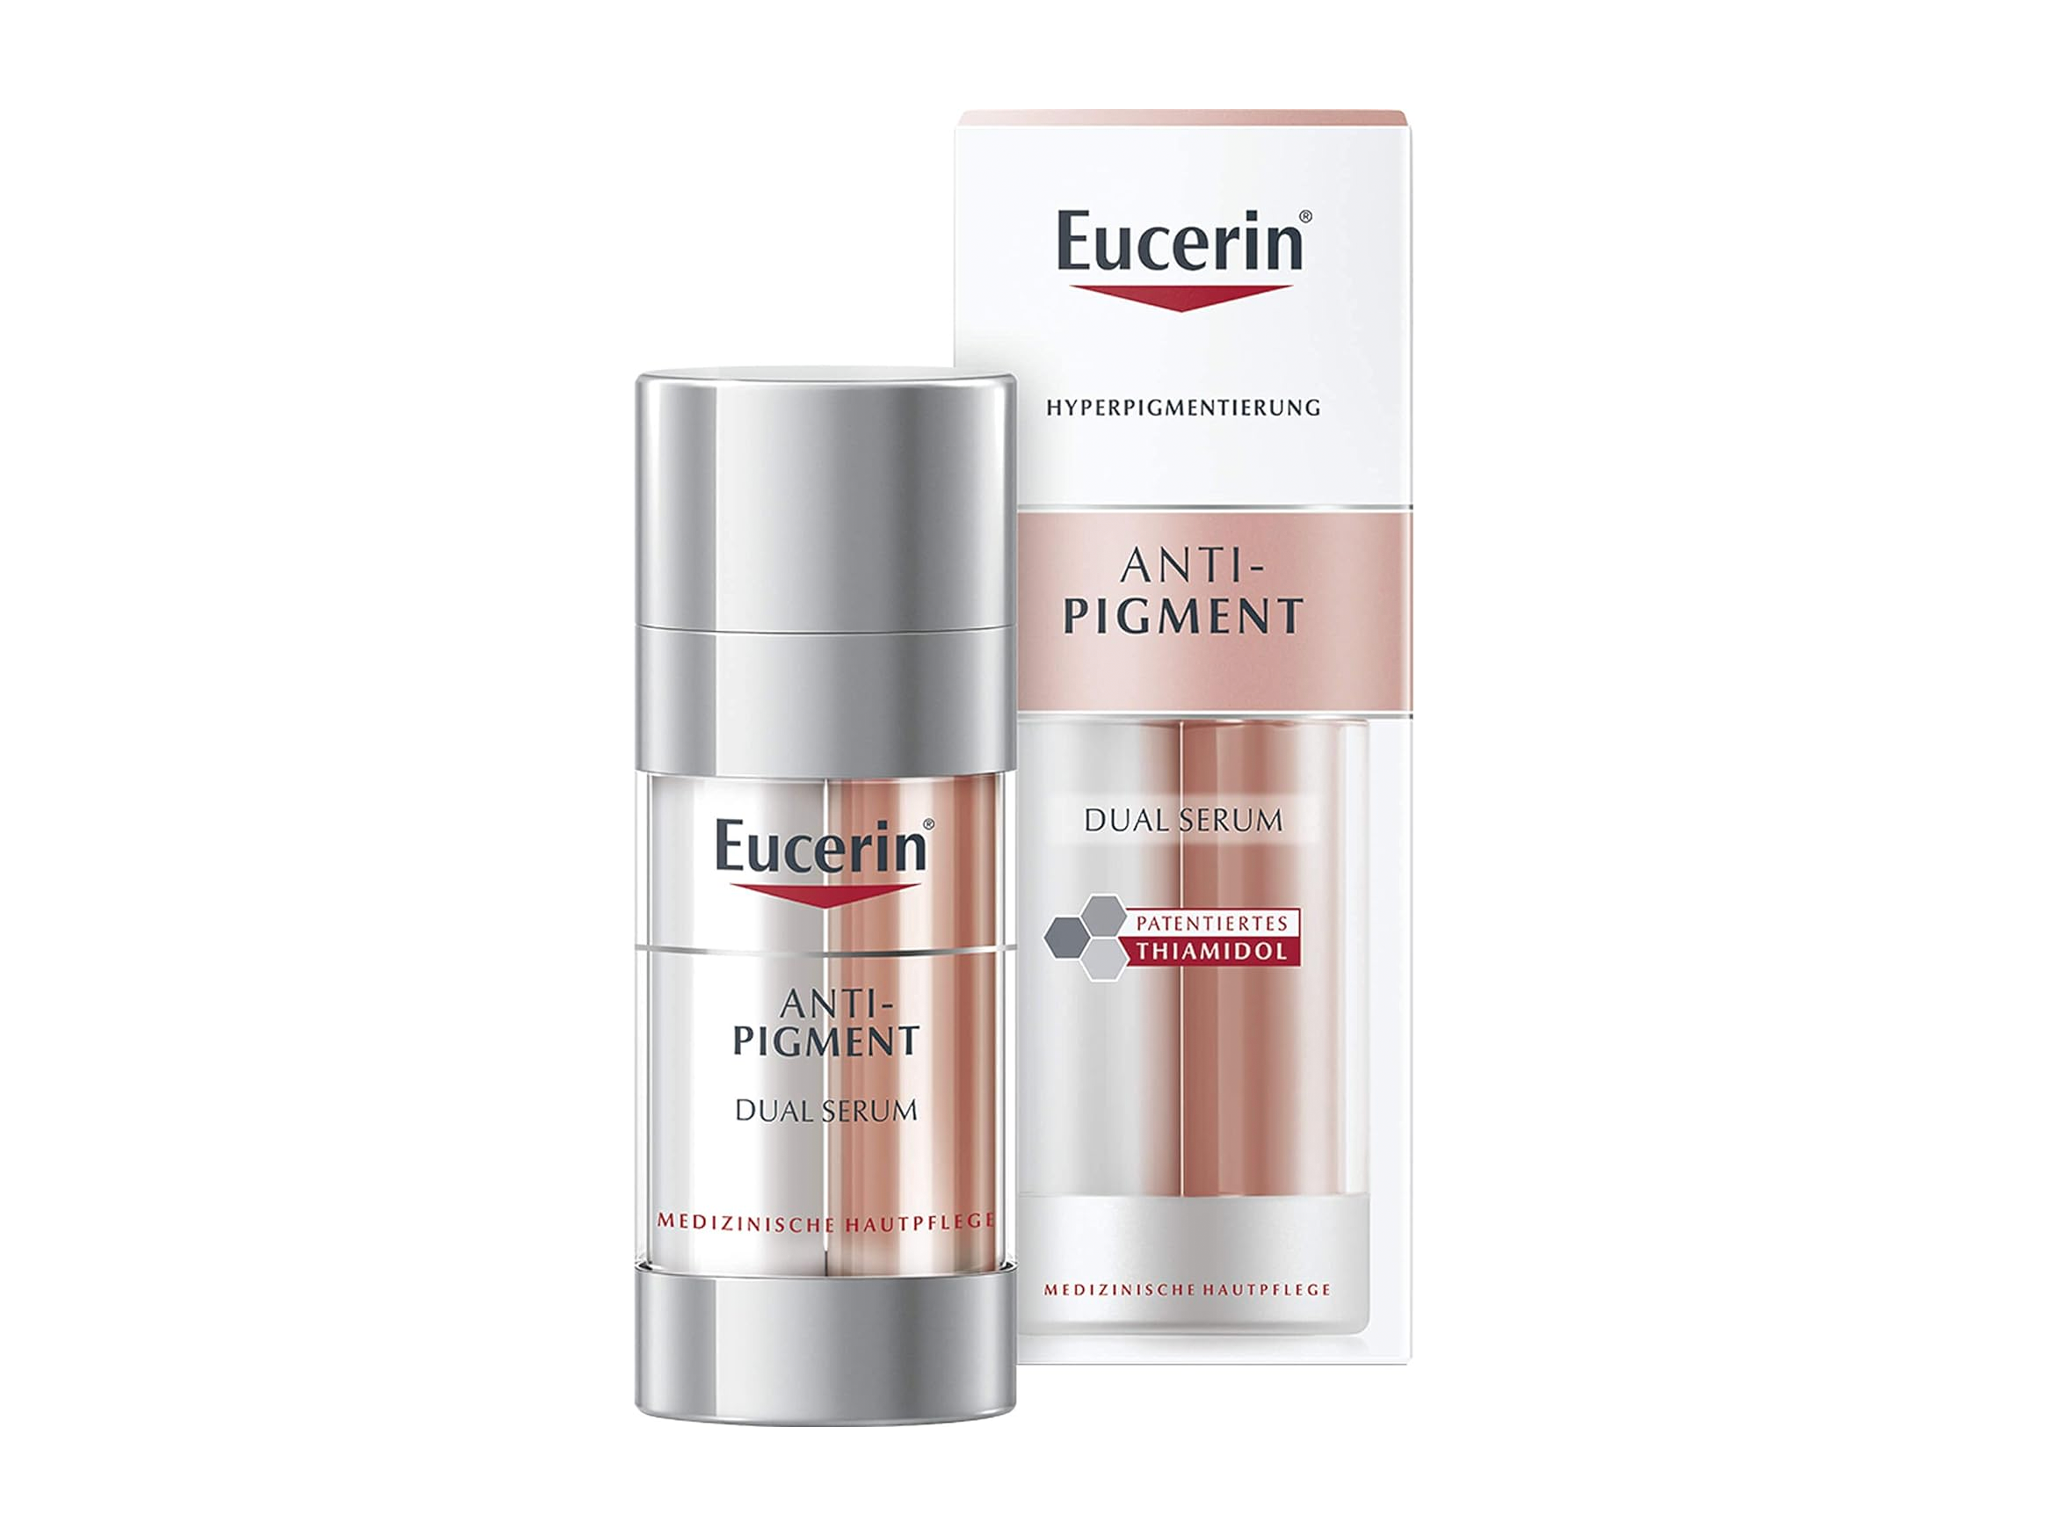 Eucerin-best-skincare-products-for-hyperpigmentation-indybest